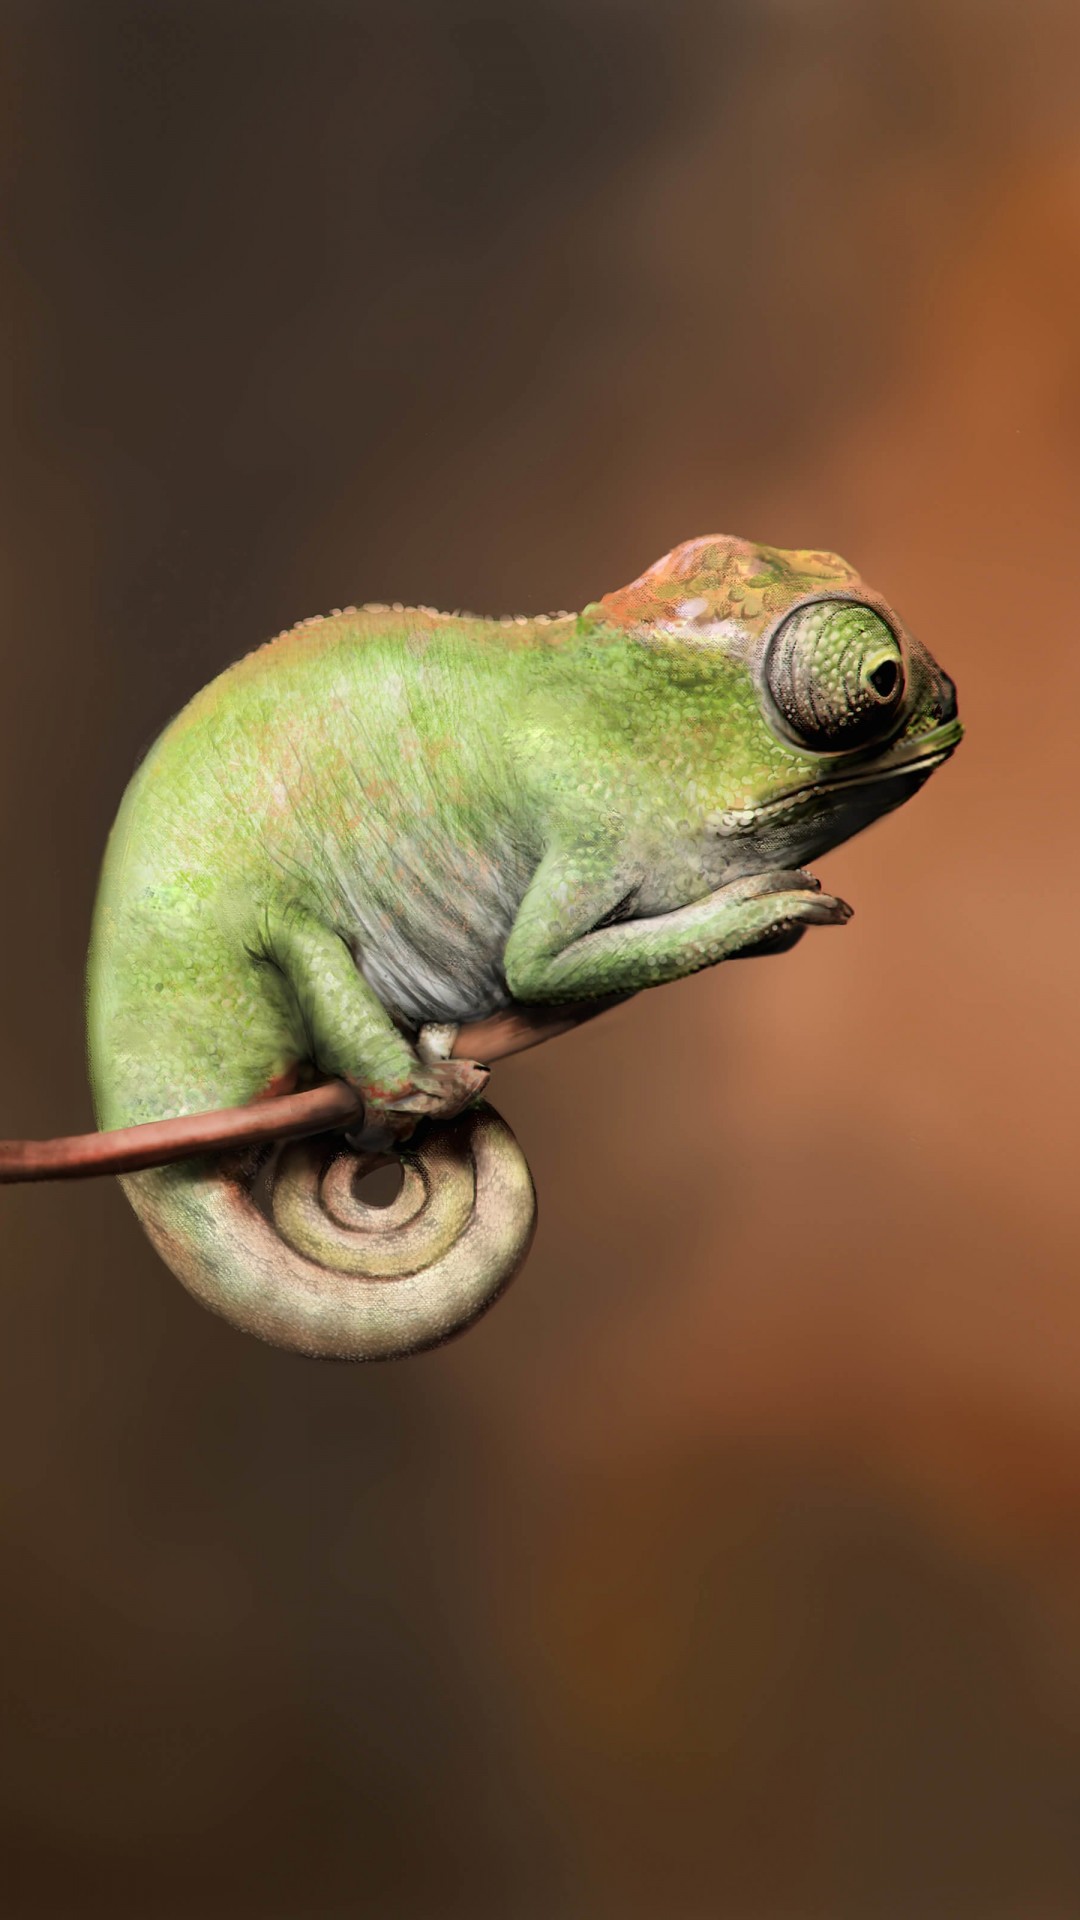 Baby Chameleon Perching On a Twisted Branch Wallpaper for SAMSUNG Galaxy S5